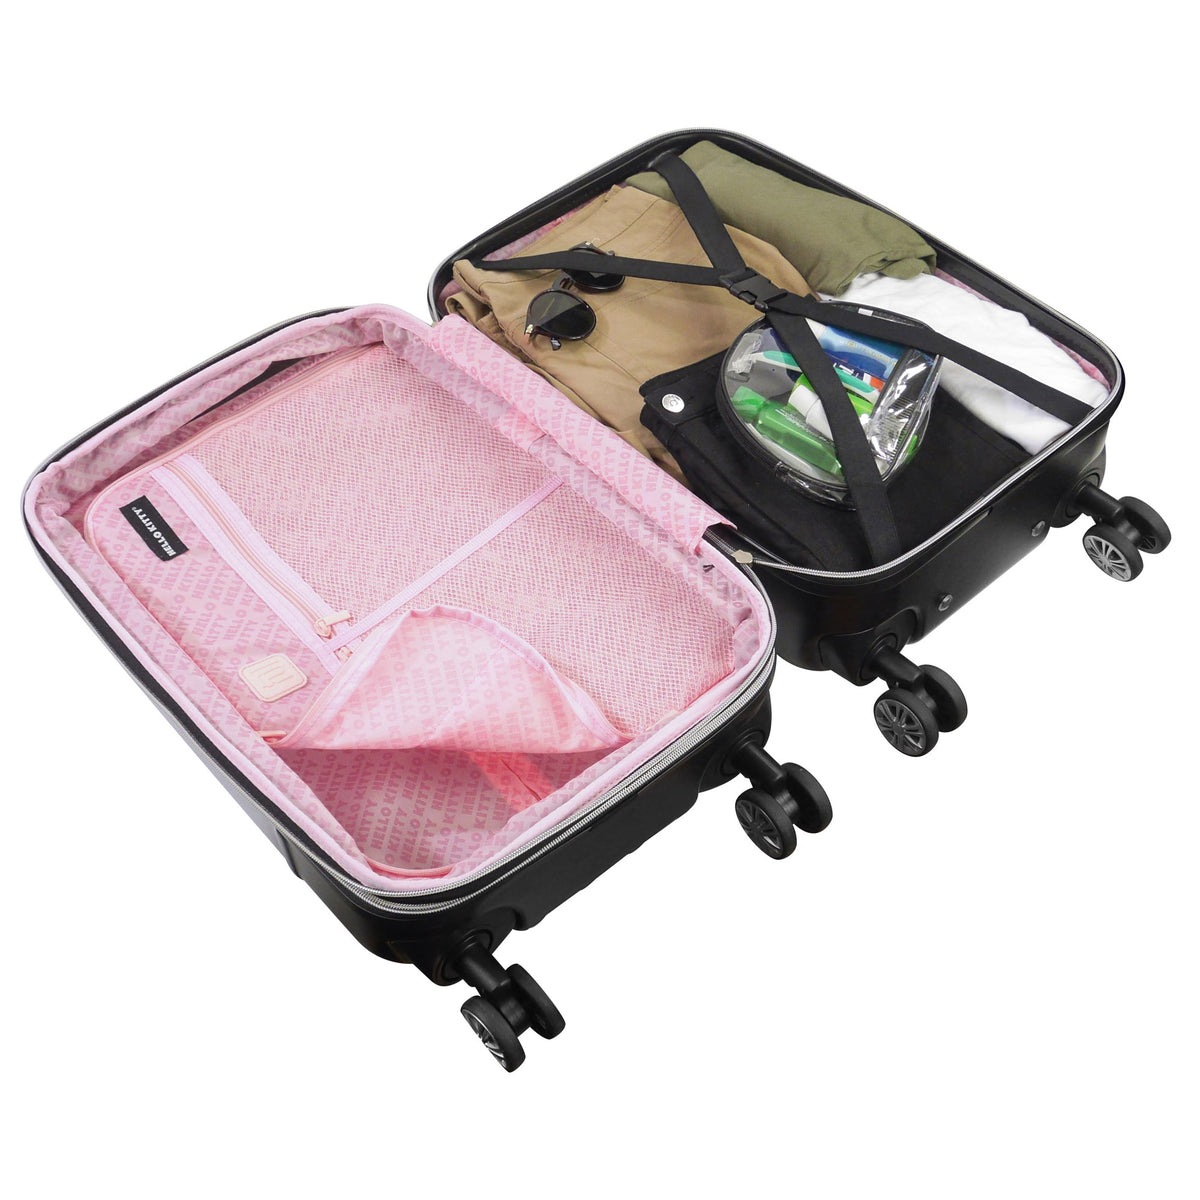 Skybags Reef Spinner 55cm Cabin Size Hard Luggage Bag